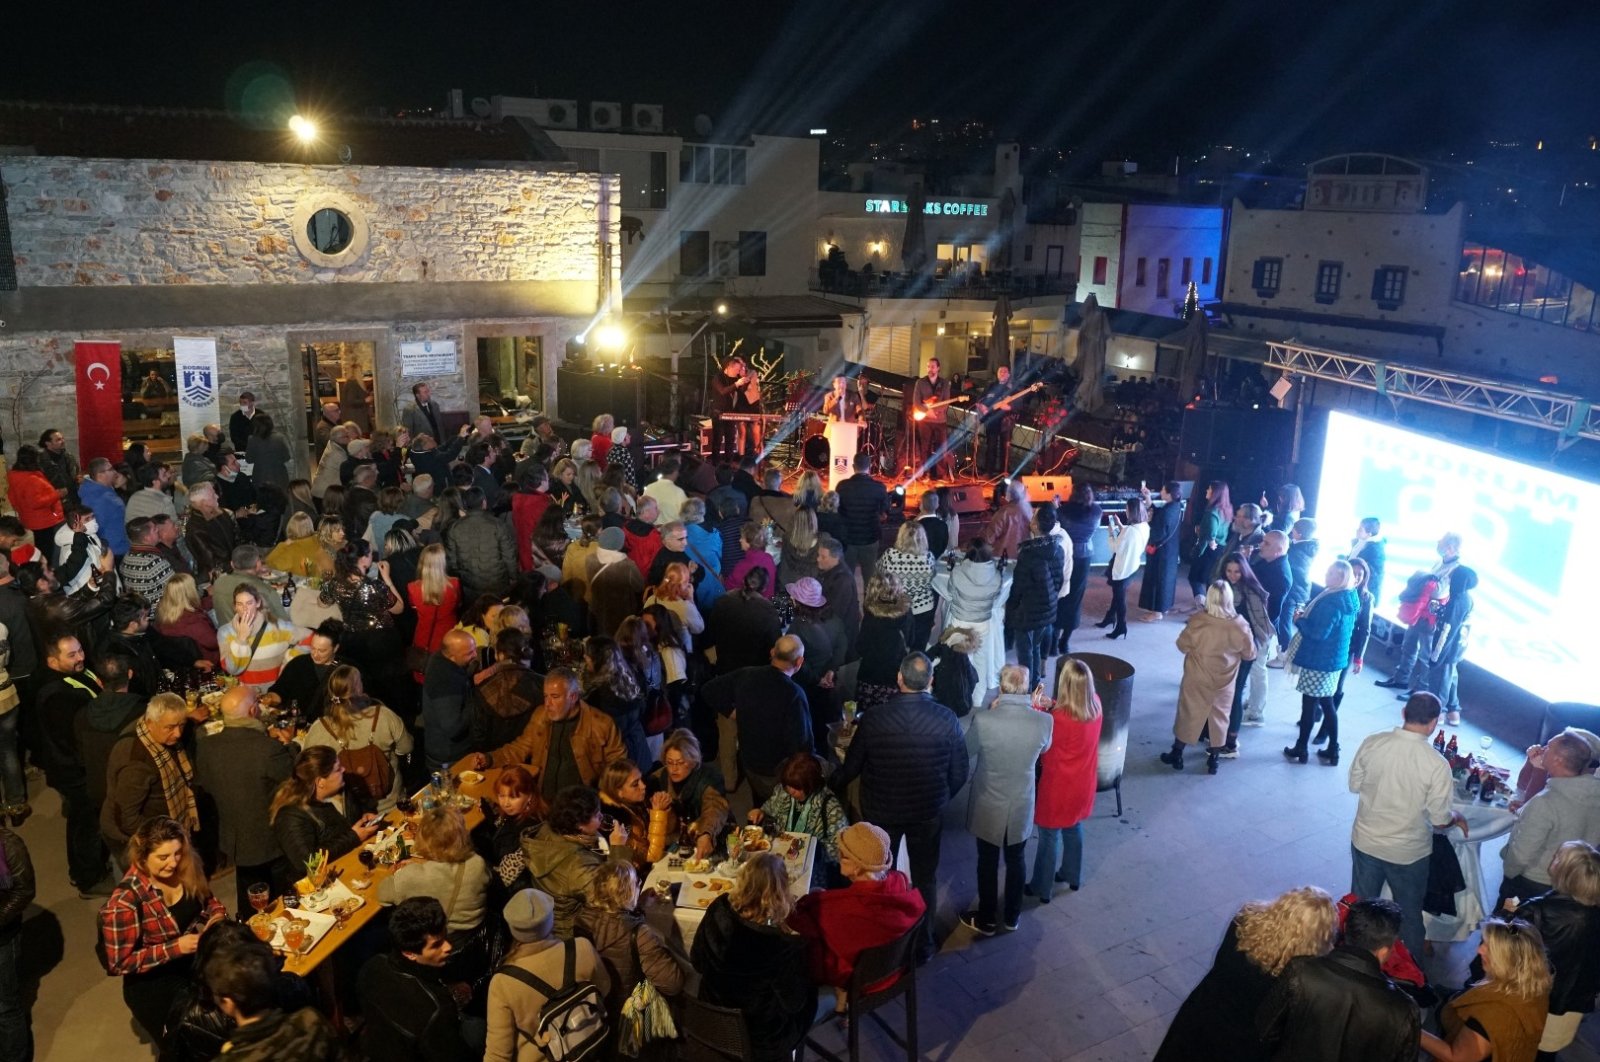 Every year, the Bodrum municipality hosts a party celebrating expats, Bodrum, Turkey, Dec. 26, 2021. (Leyla Yvonne Ergil for Daily Sabah)